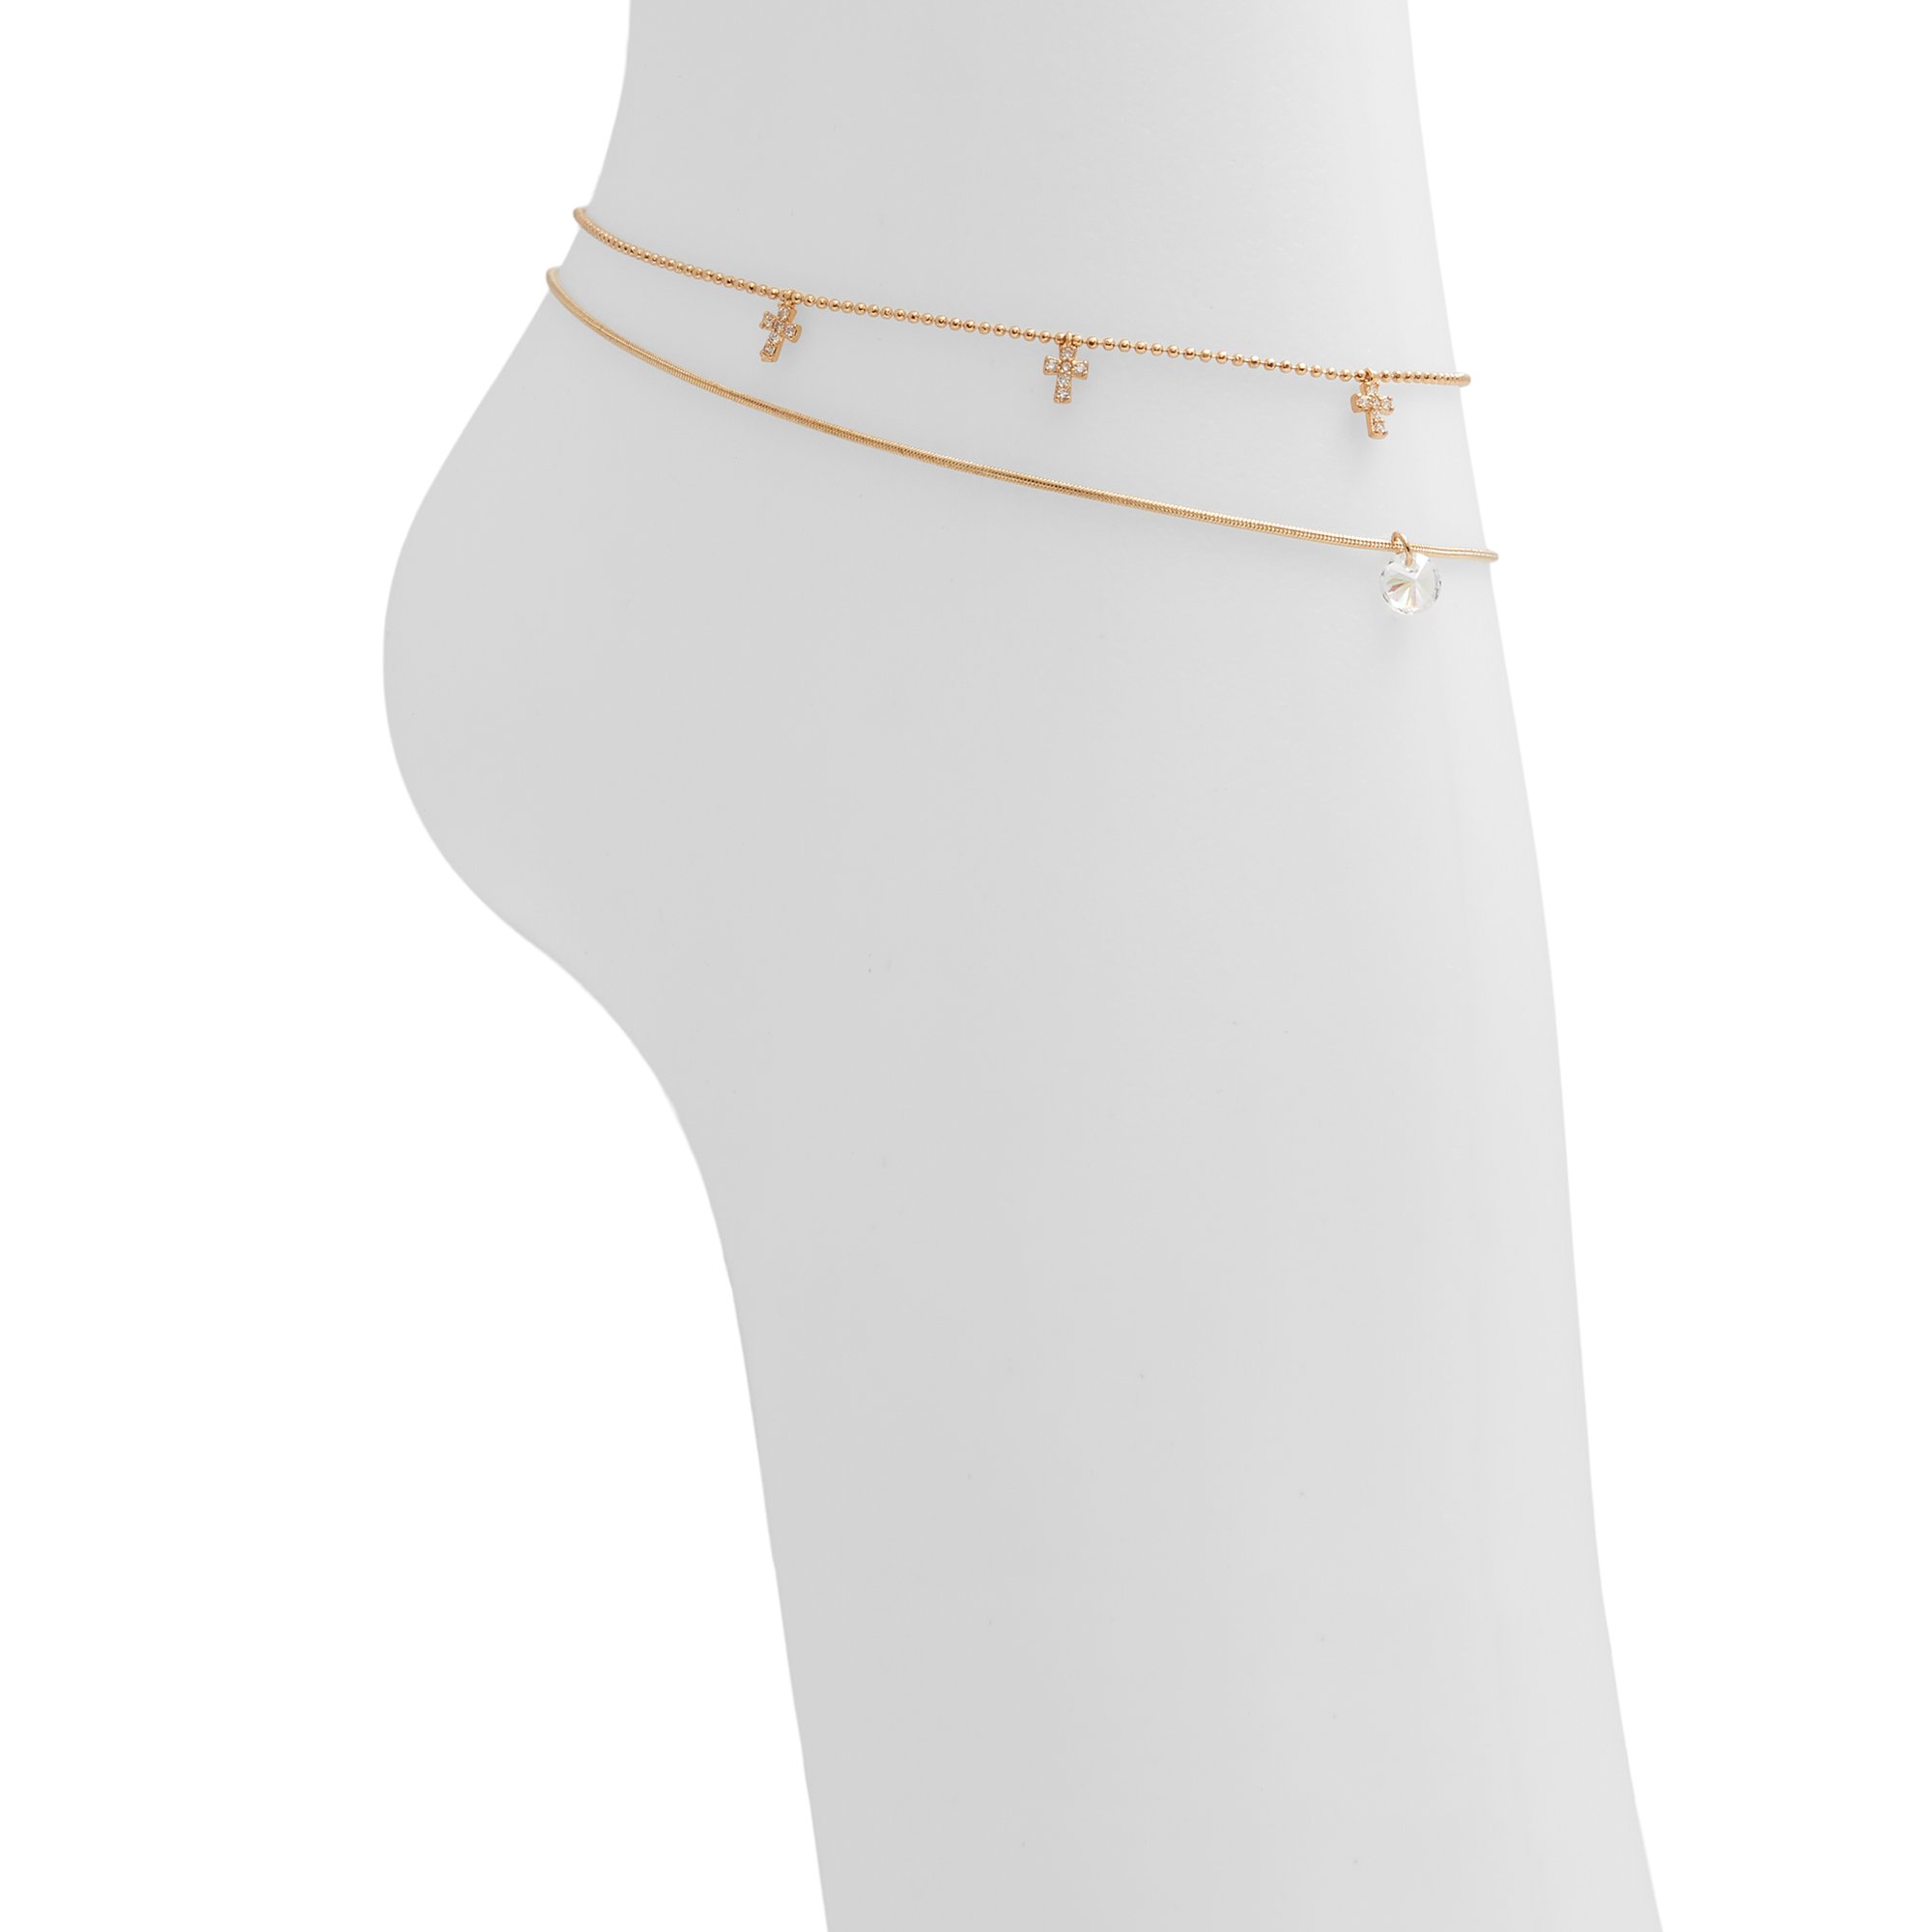 Image of ALDO Balisa - Women's Anklet Jewelry - Gold-Clear